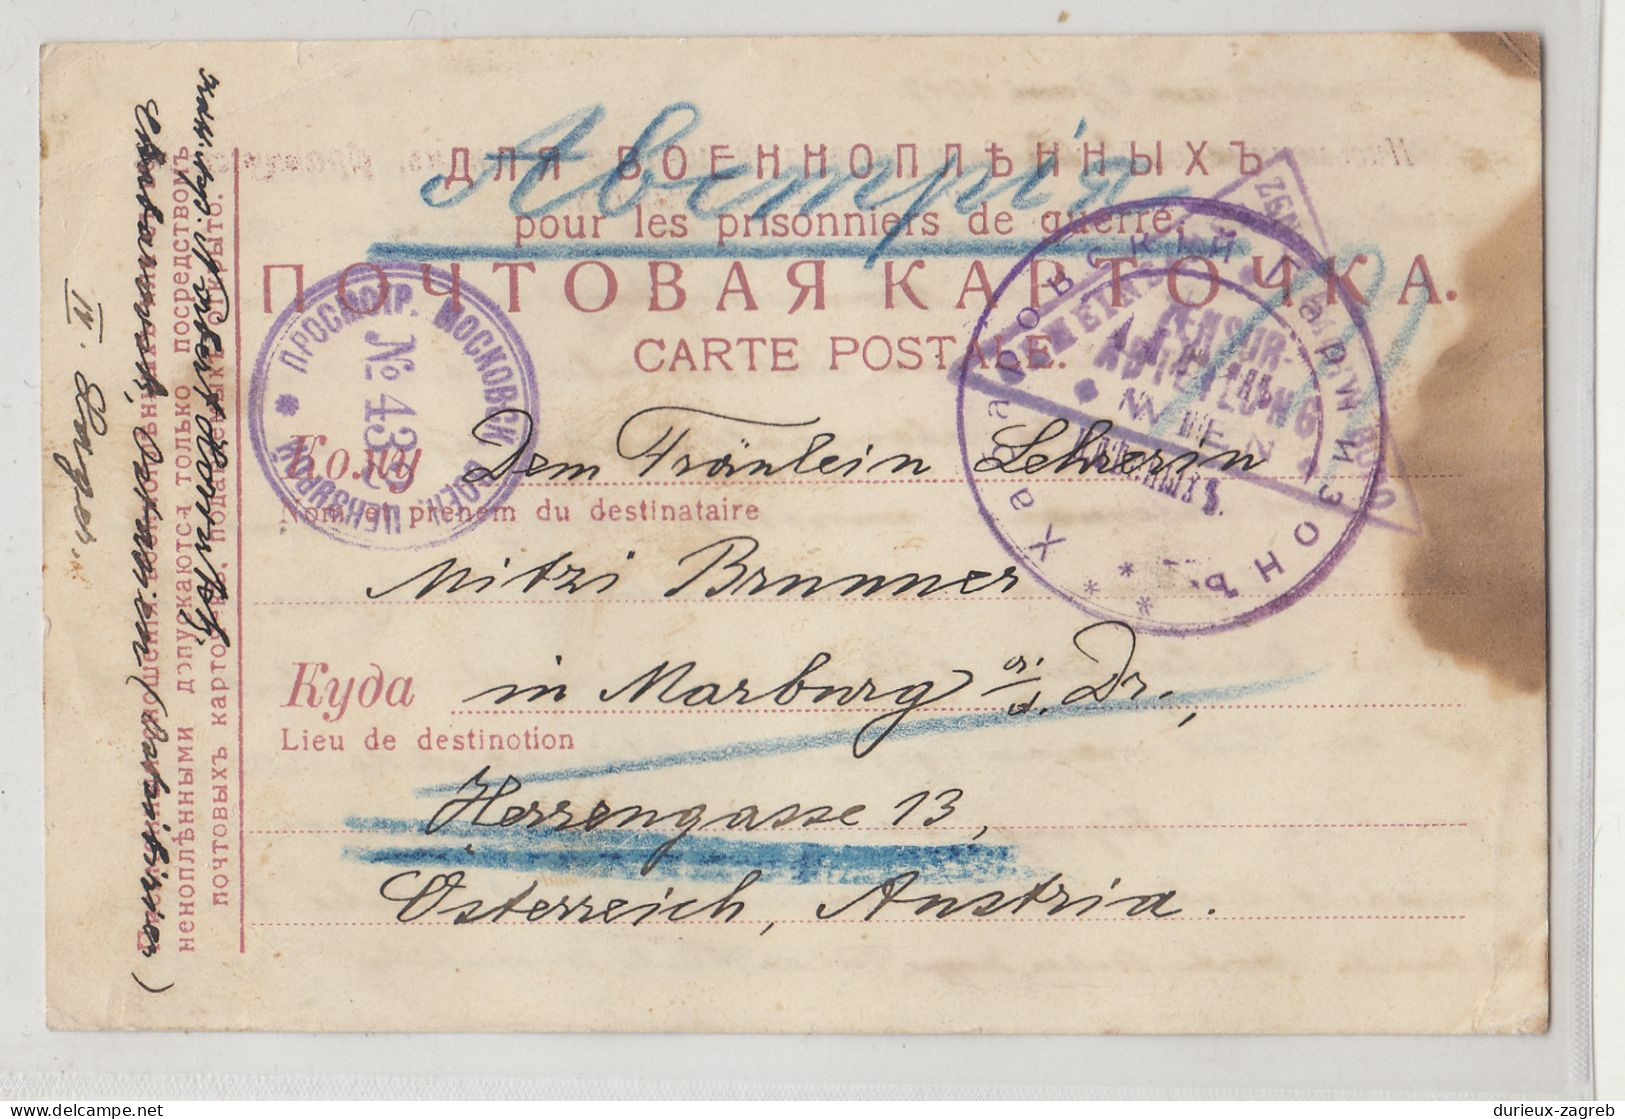 Russia WWI POW Postcard Posted 1917 Habarovsk To Marburg A.D. B240510 - Ganzsachen